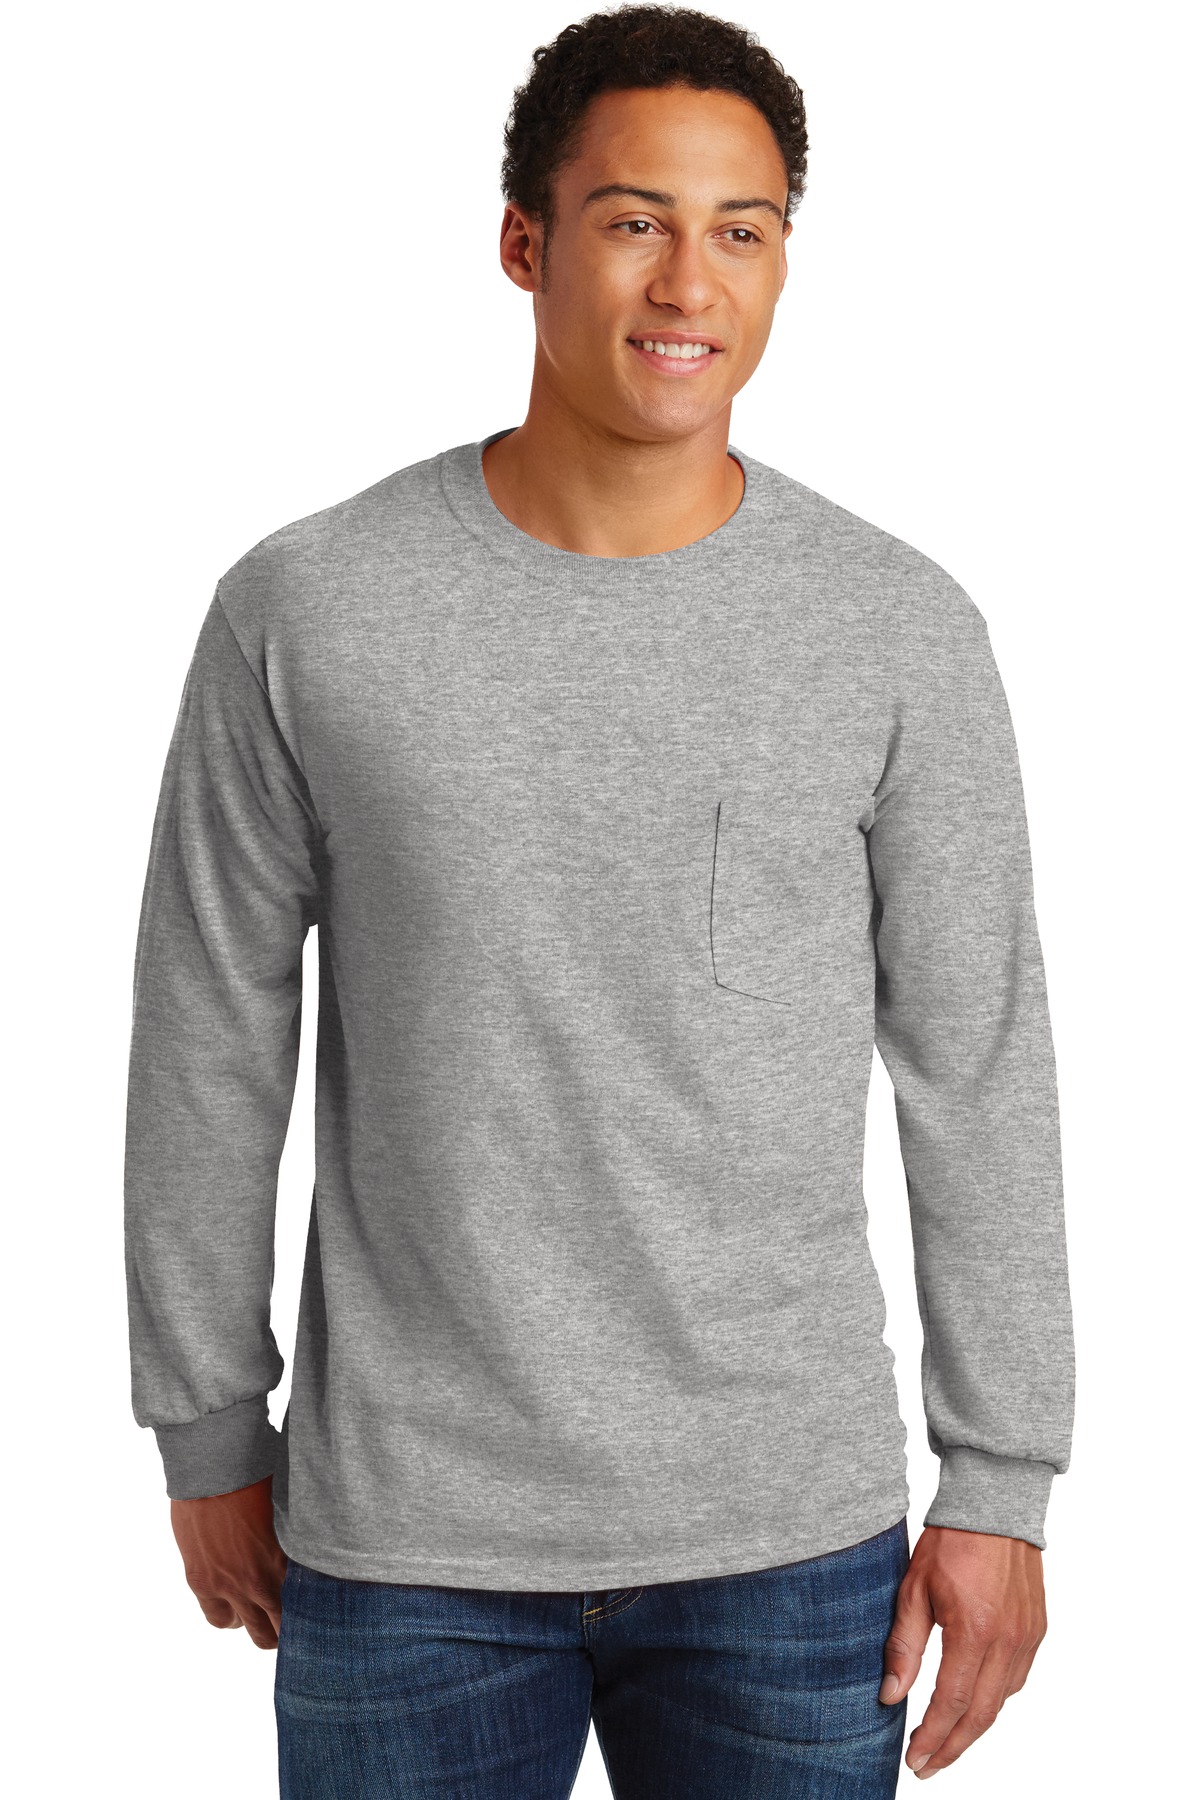 2410 Ultra Cotton 100% Cotton Long Sleeve T-Shirt with Pocket